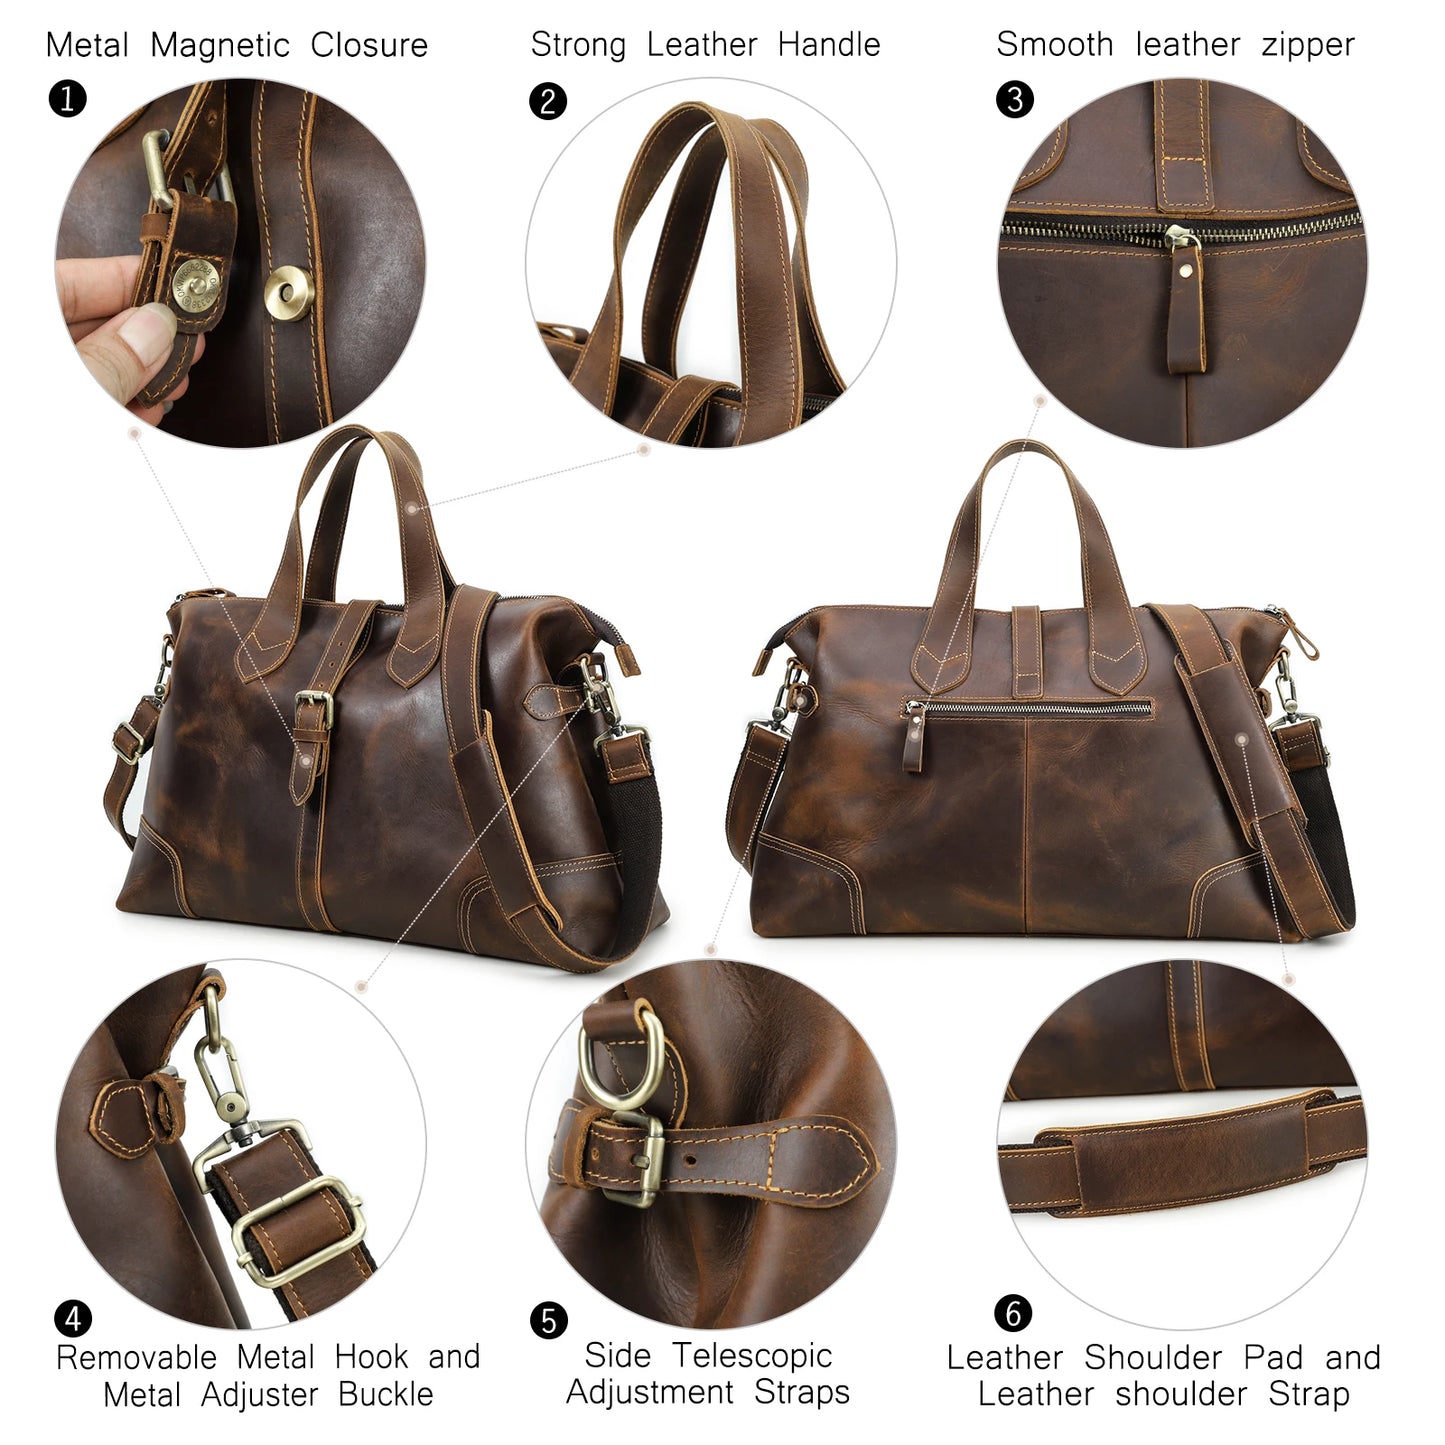 Contact's Men Crazy Horse Leather Travel Bag Multifunctional Business Casual Luggage Bag Large Capacity Vintage Tote Handbags